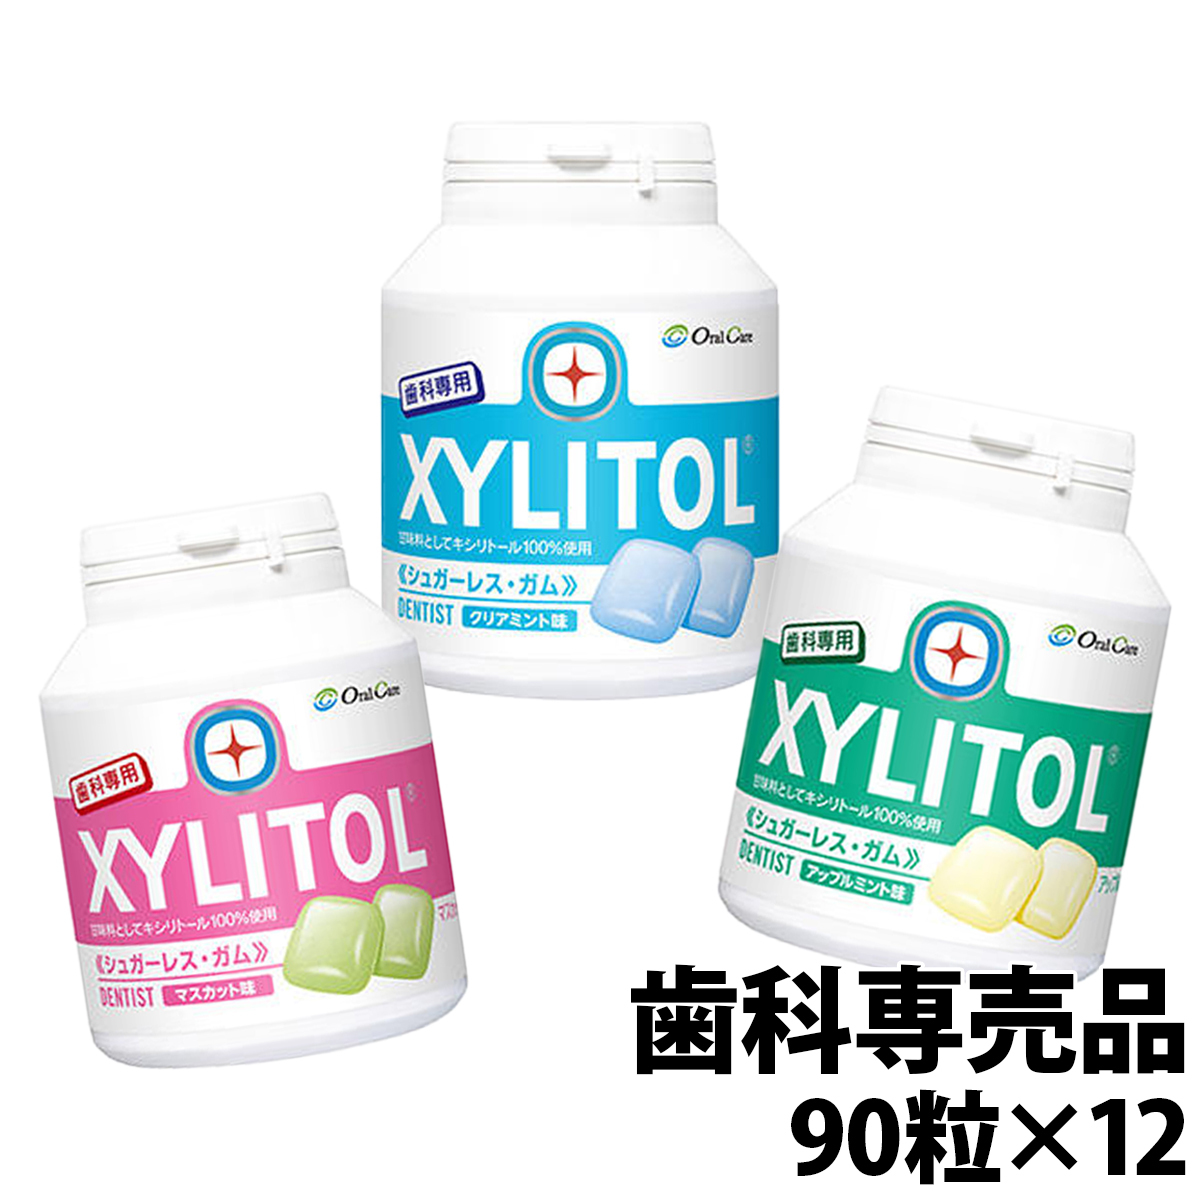 "P5% restoration " Lotte xylitol gum bottle type 90 bead ×1 2 ps courier service carriage free xylitol 100% tooth ...